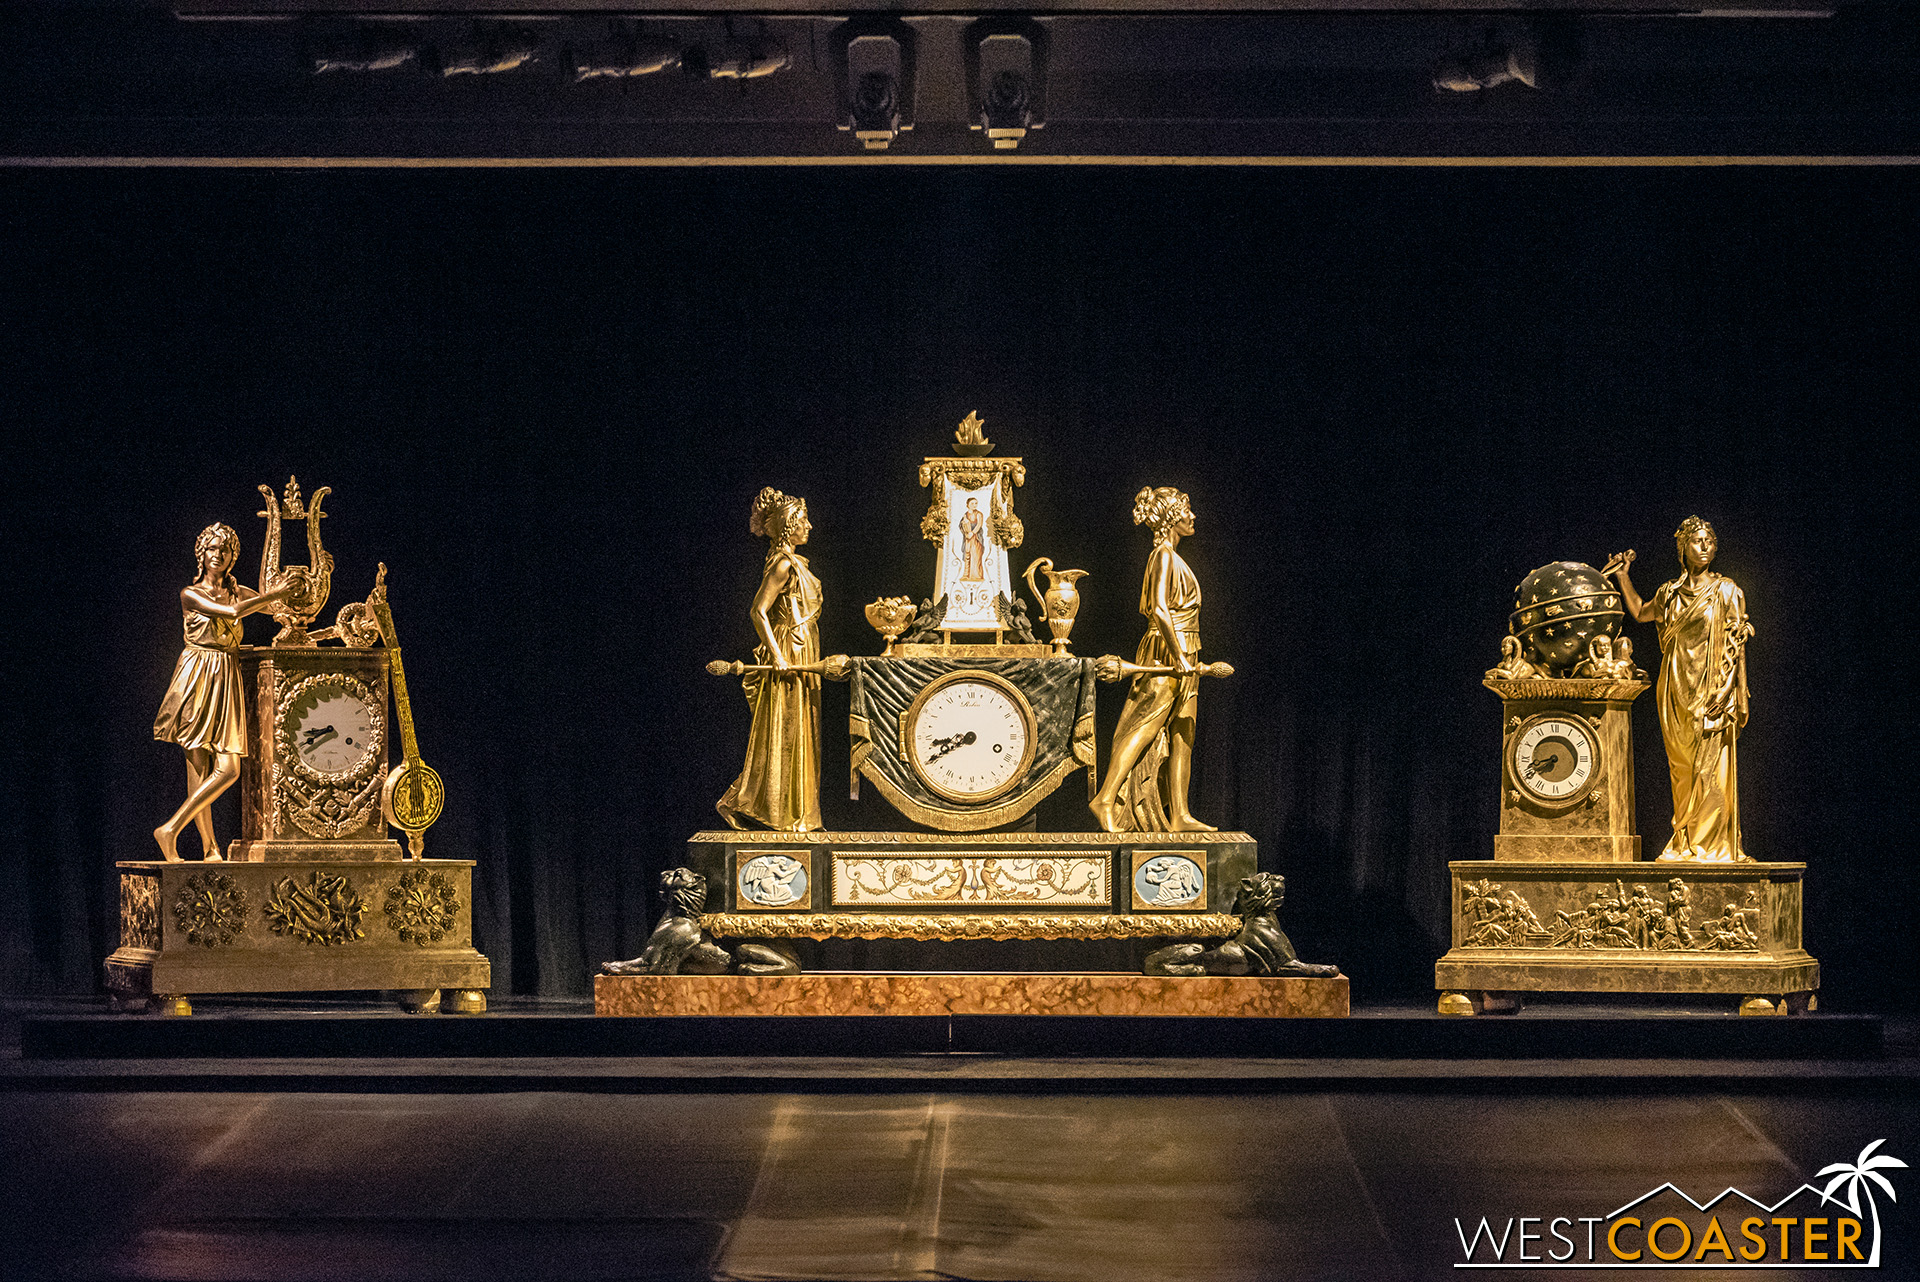  Finally, a collection of French Empire clocks. 